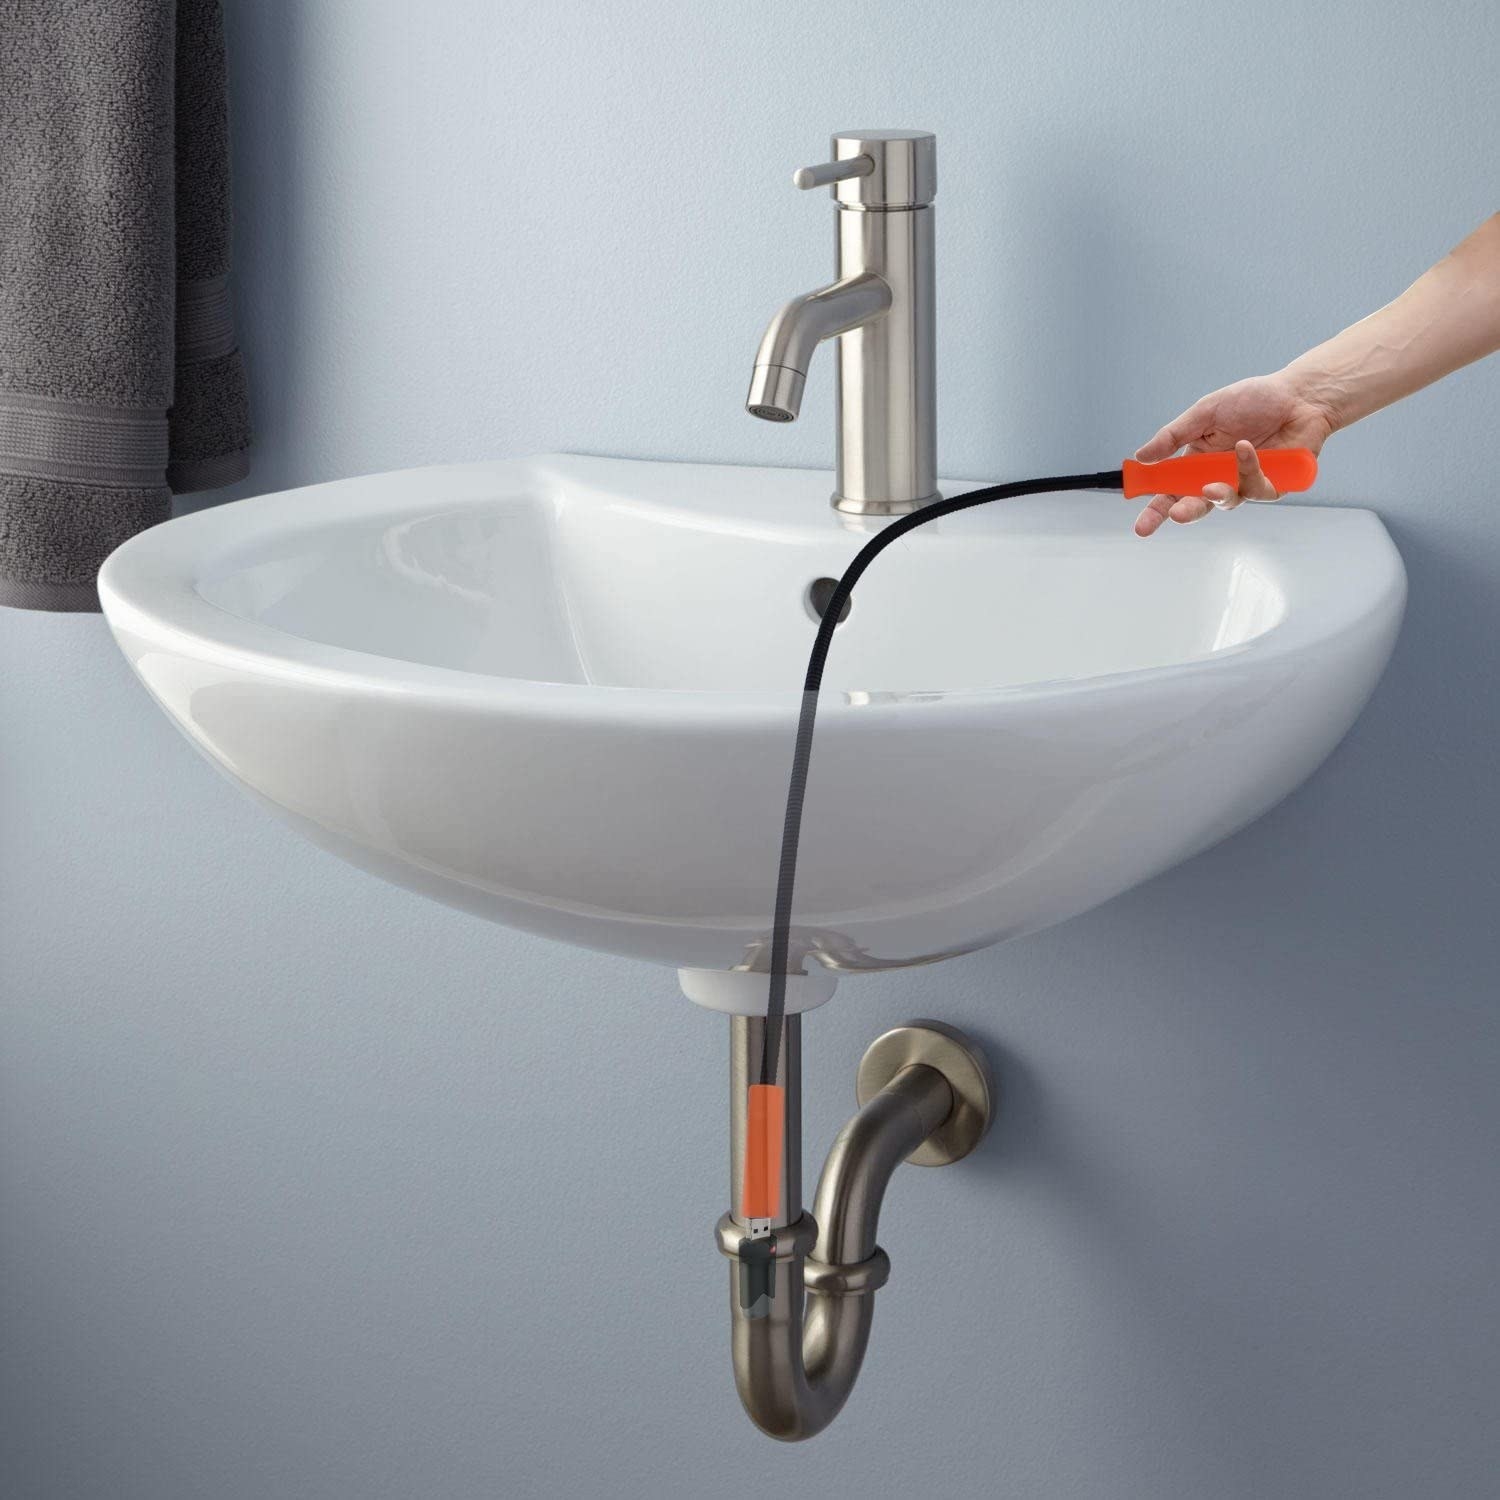 A person using the magnetic tool to retrieve something from a sink drain